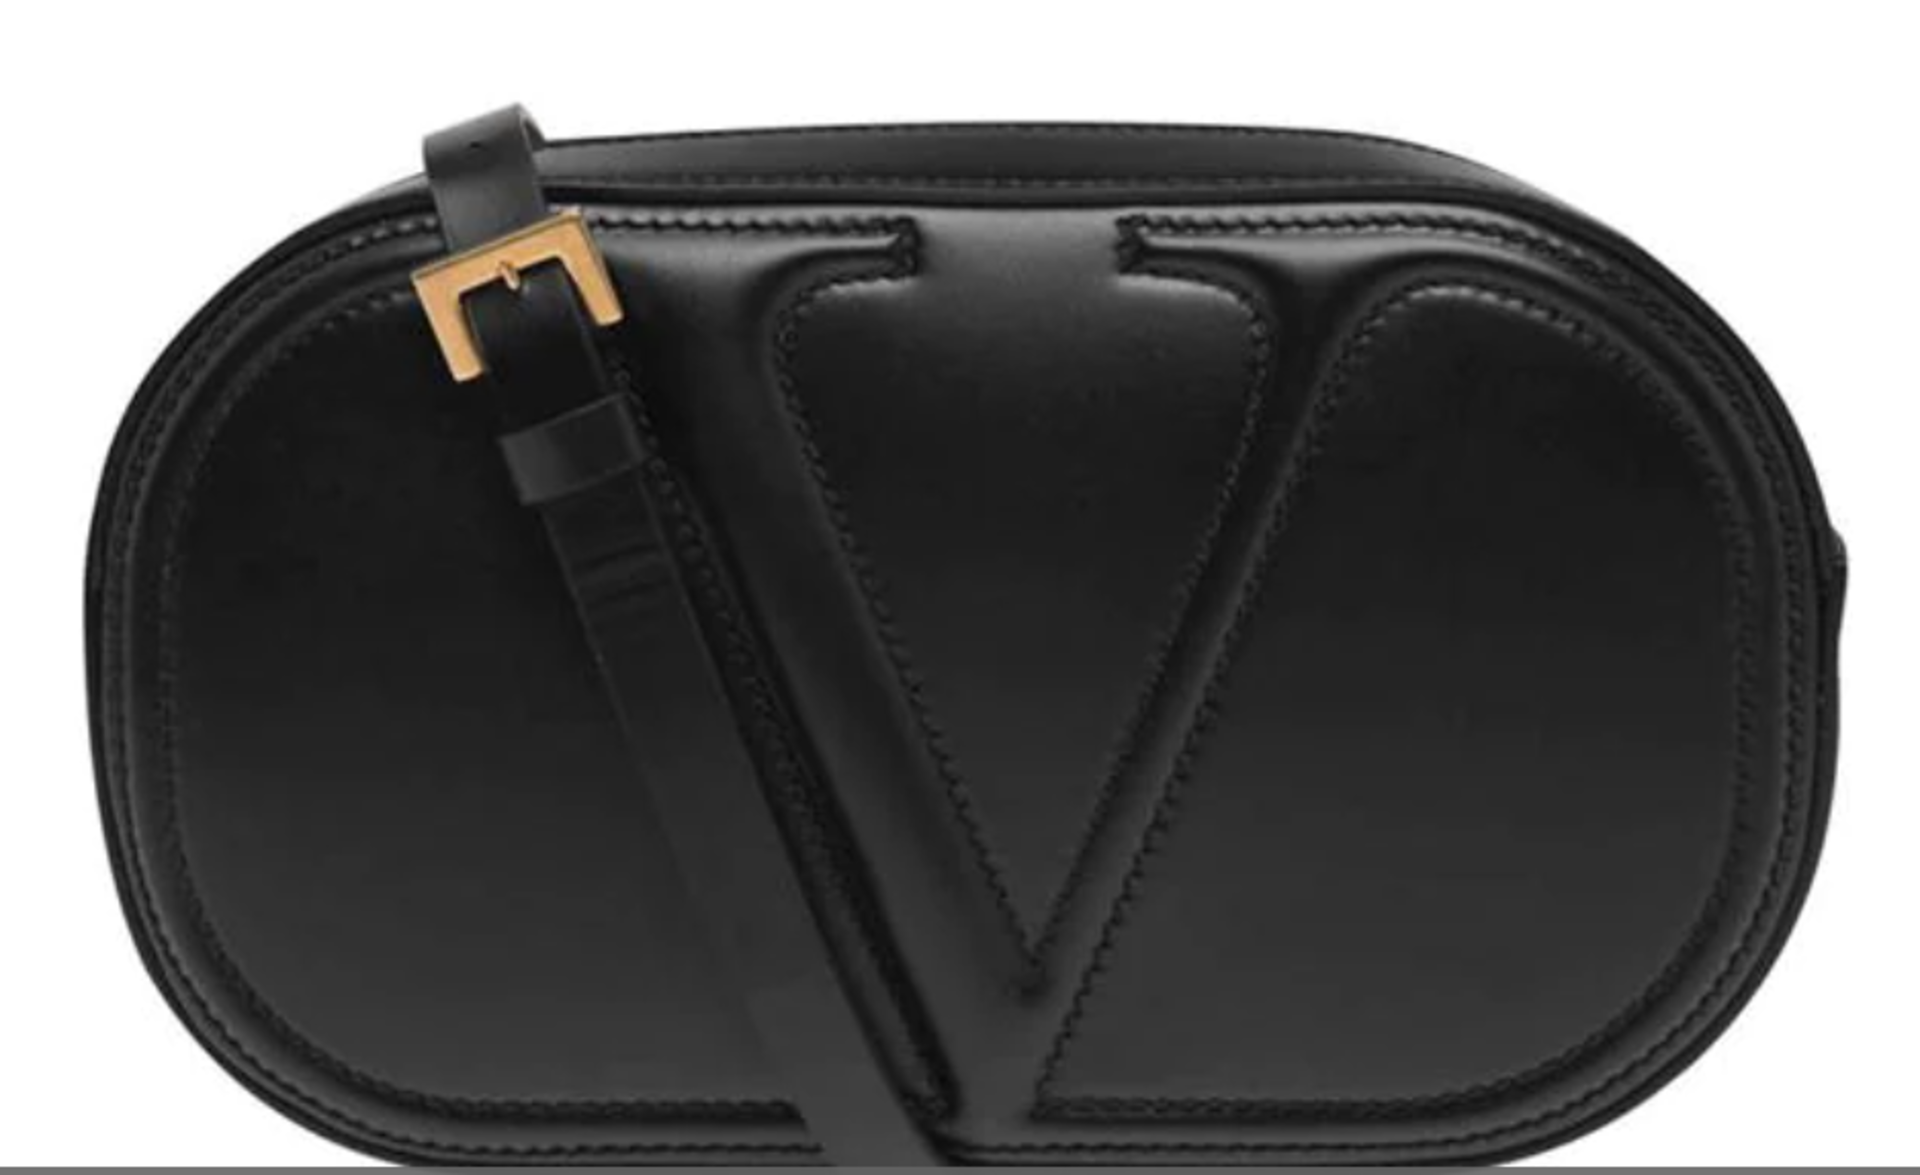 VALENTINO GARAVANI V LOGO CROSS BODY CAMERA BAG. RRP £905.00. Update your bag collection with the